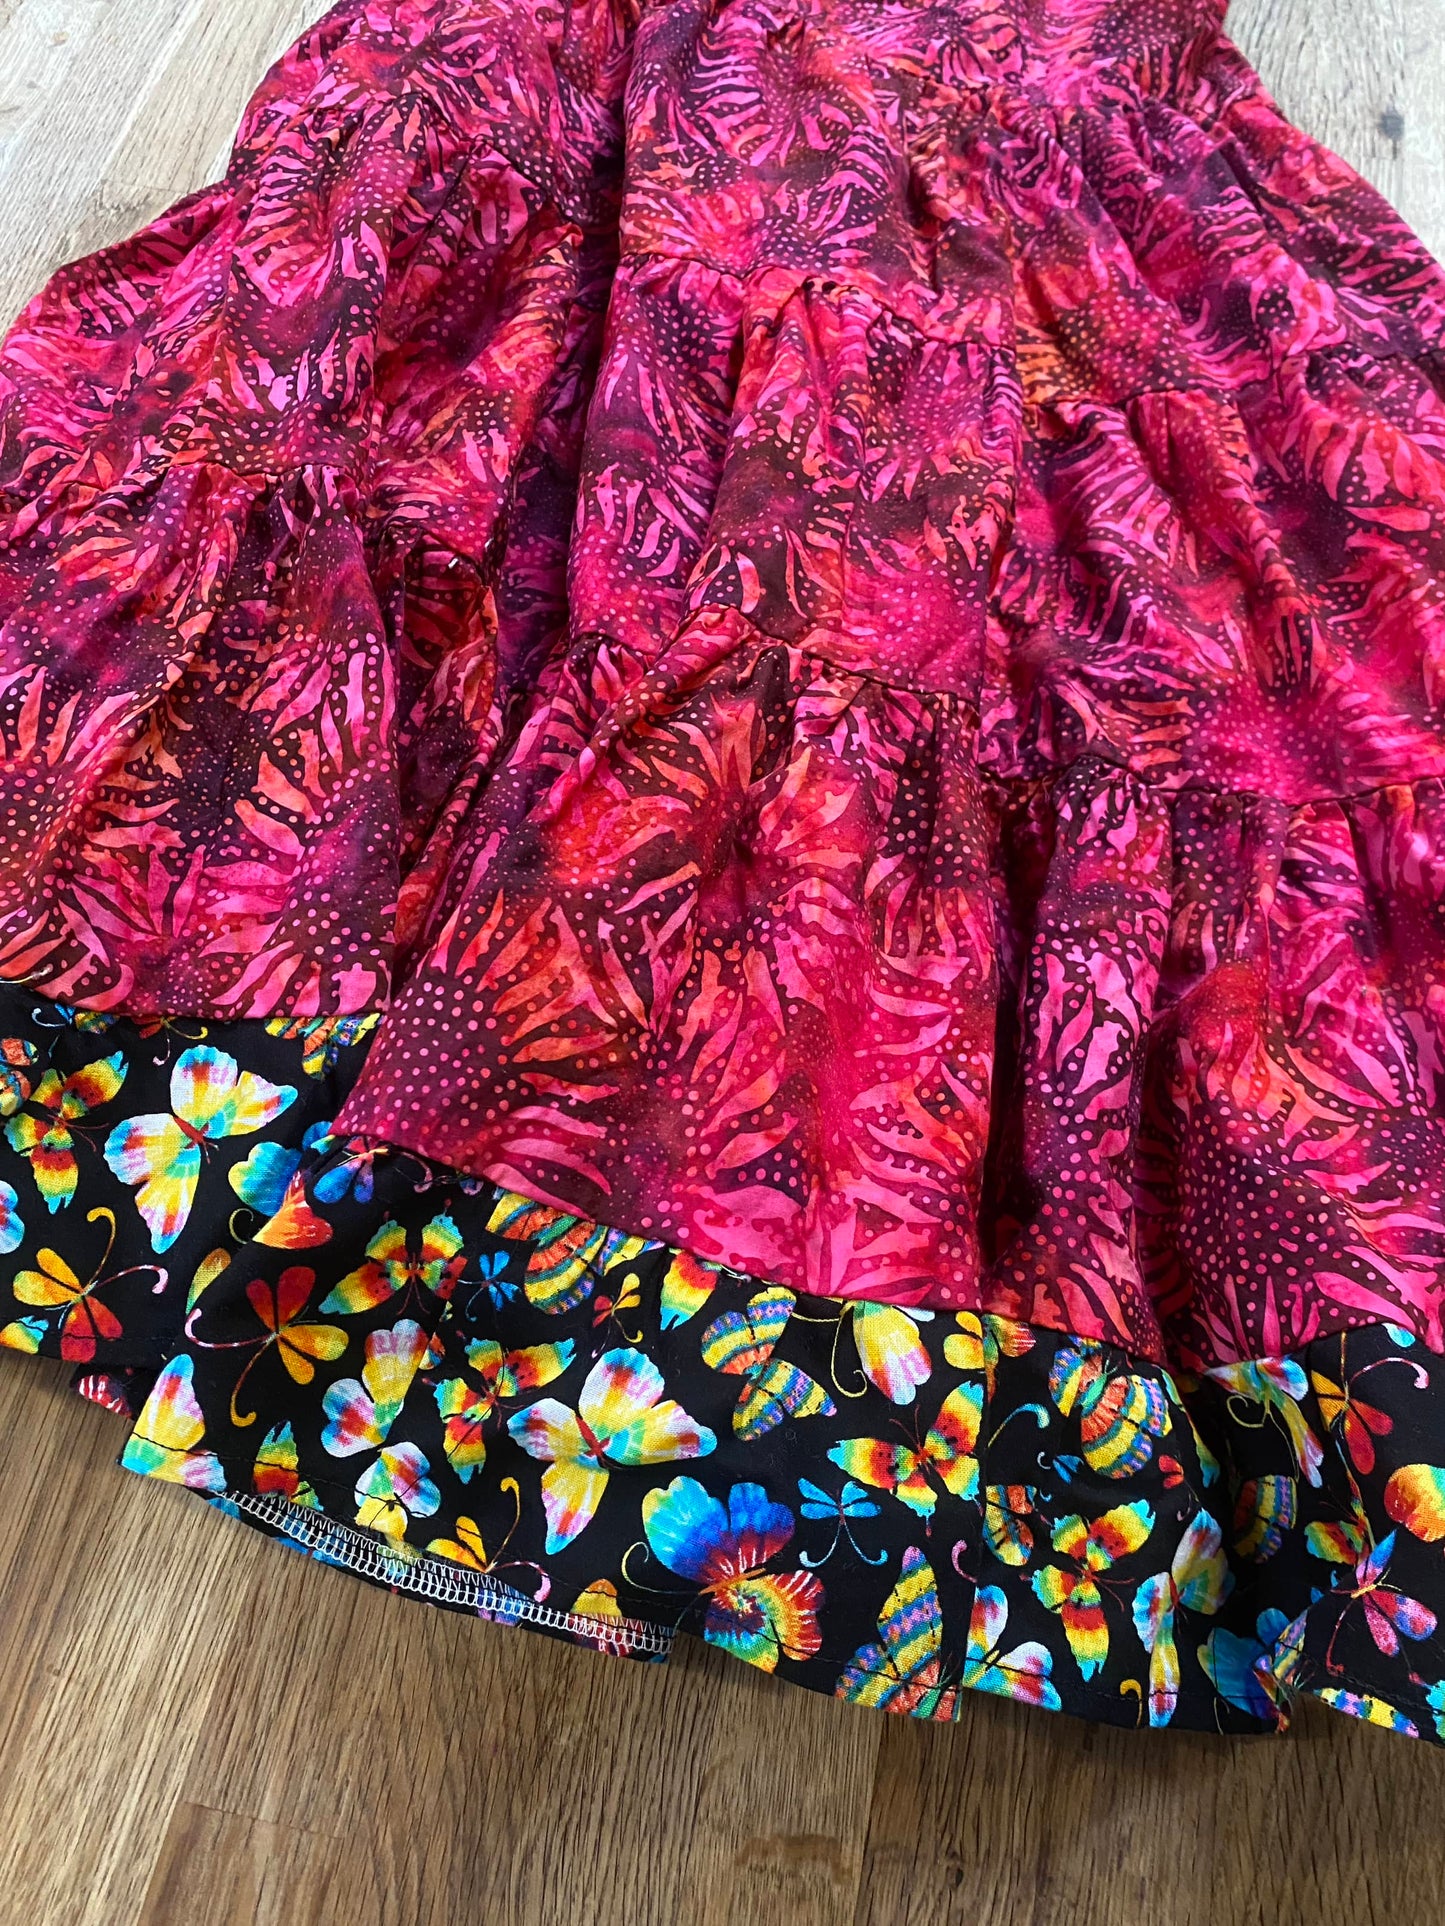 Sunflowers Dress (Pre-Loved) Size 14